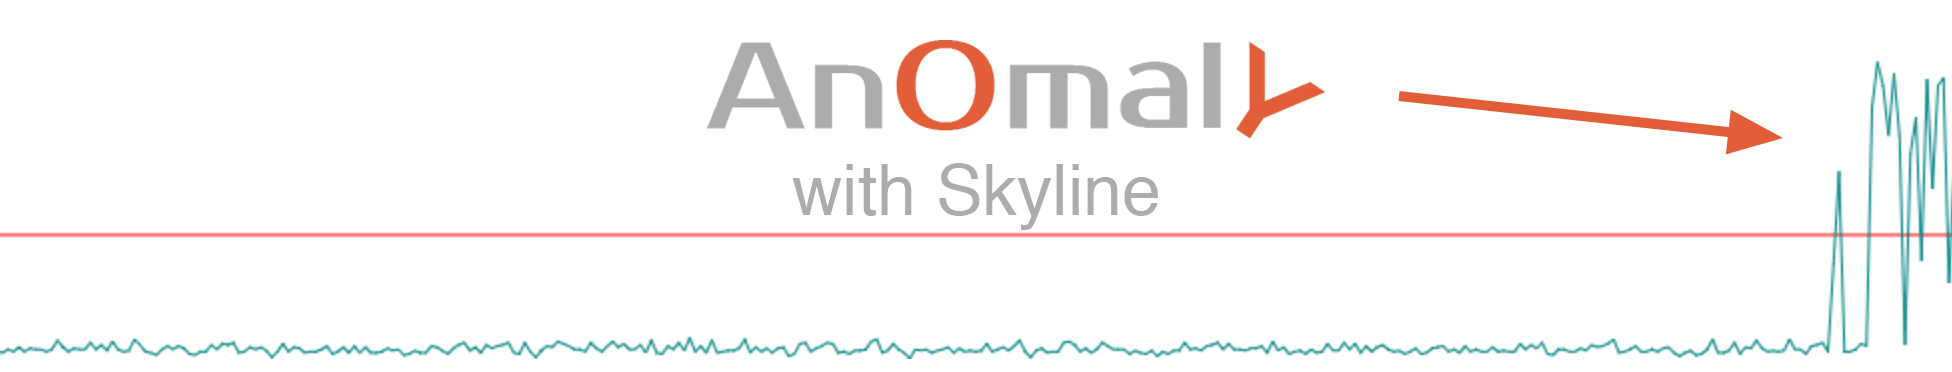 install skyline anomaly detection